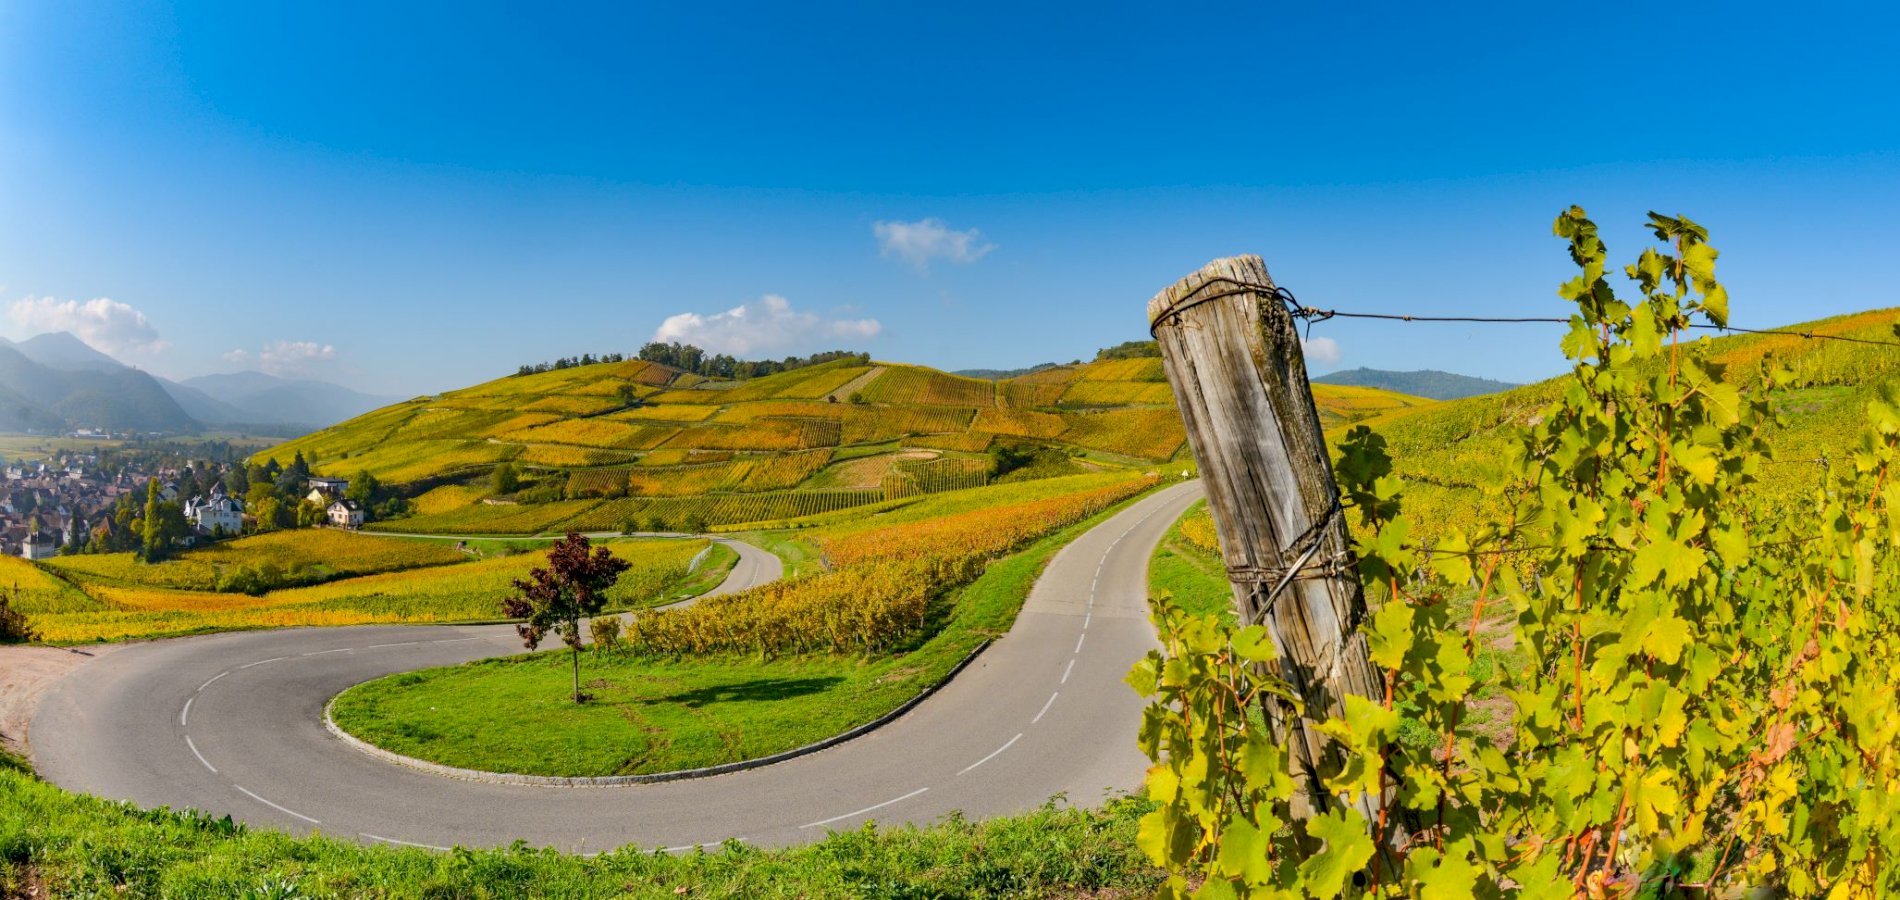 Ophorus Tours - 8 Days Alsace & Burgundy Small Group Private Travel Package - 4* Hotel Option